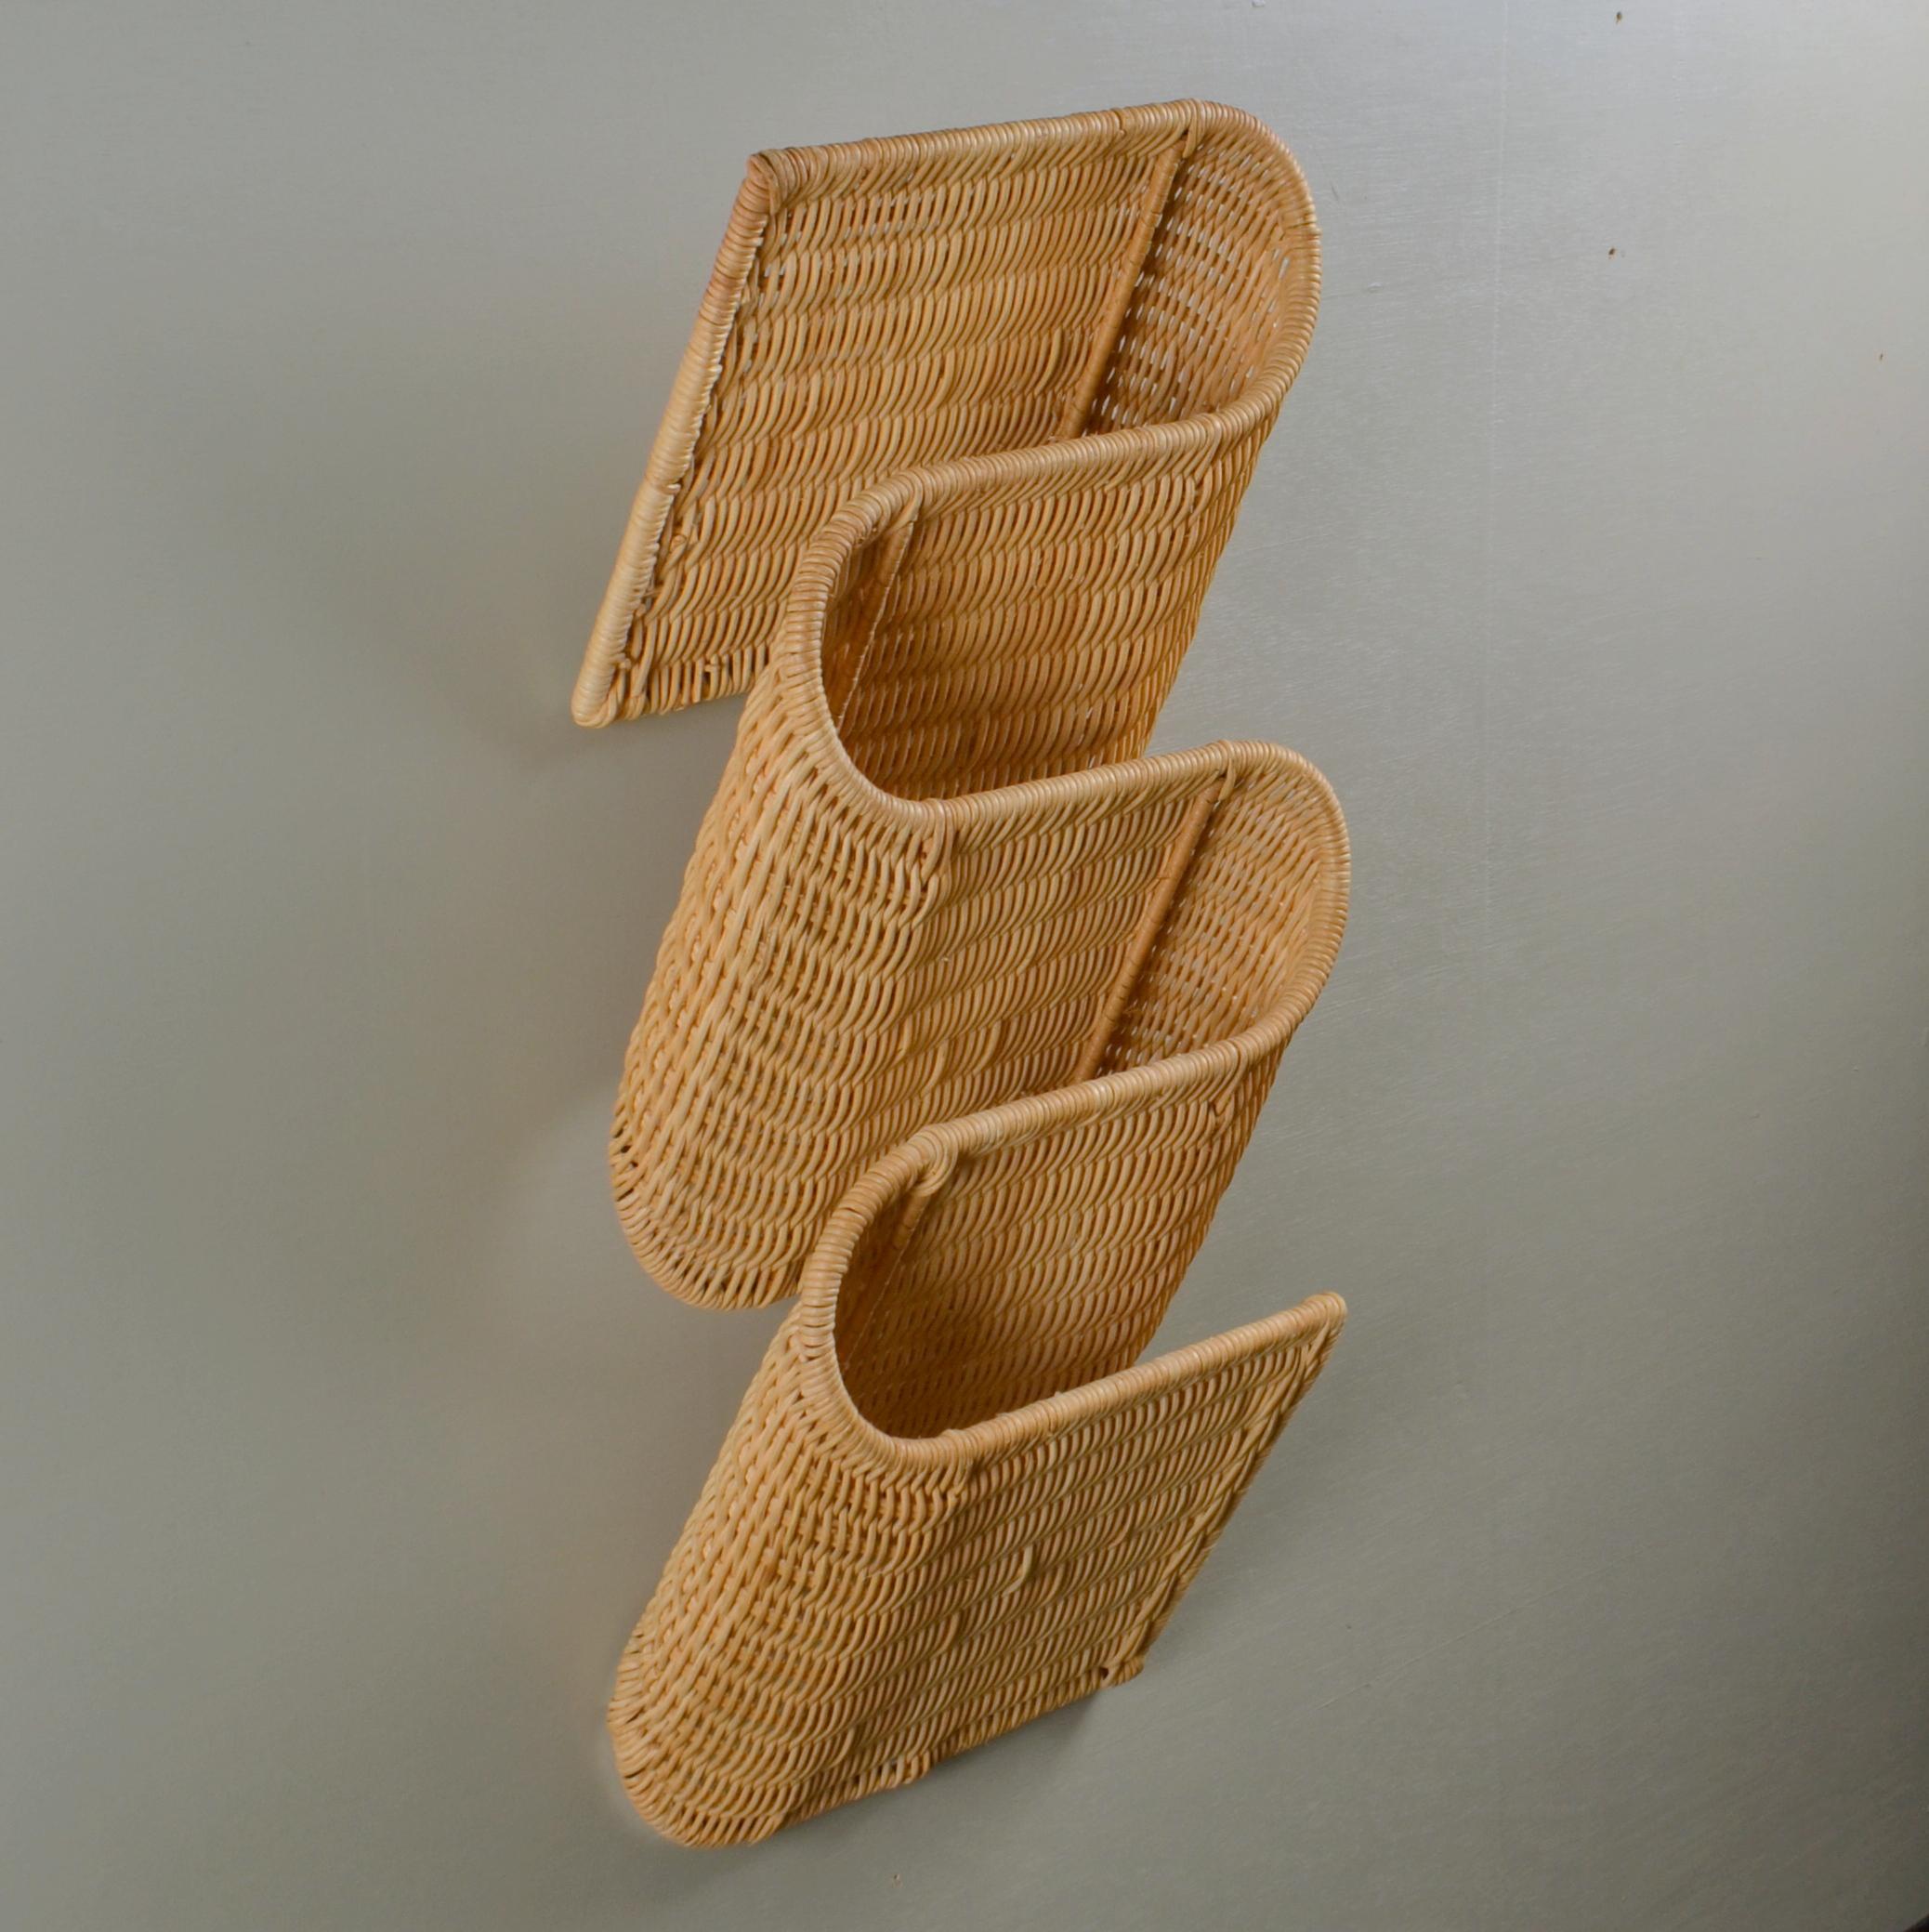 Wall mounted rattan magazine holder is very efficient and decorative storage system that snakes along the wall. It has 4 sections for magazines when hung vertically. The cane work is woven around a metal structure. They are made in Italy,